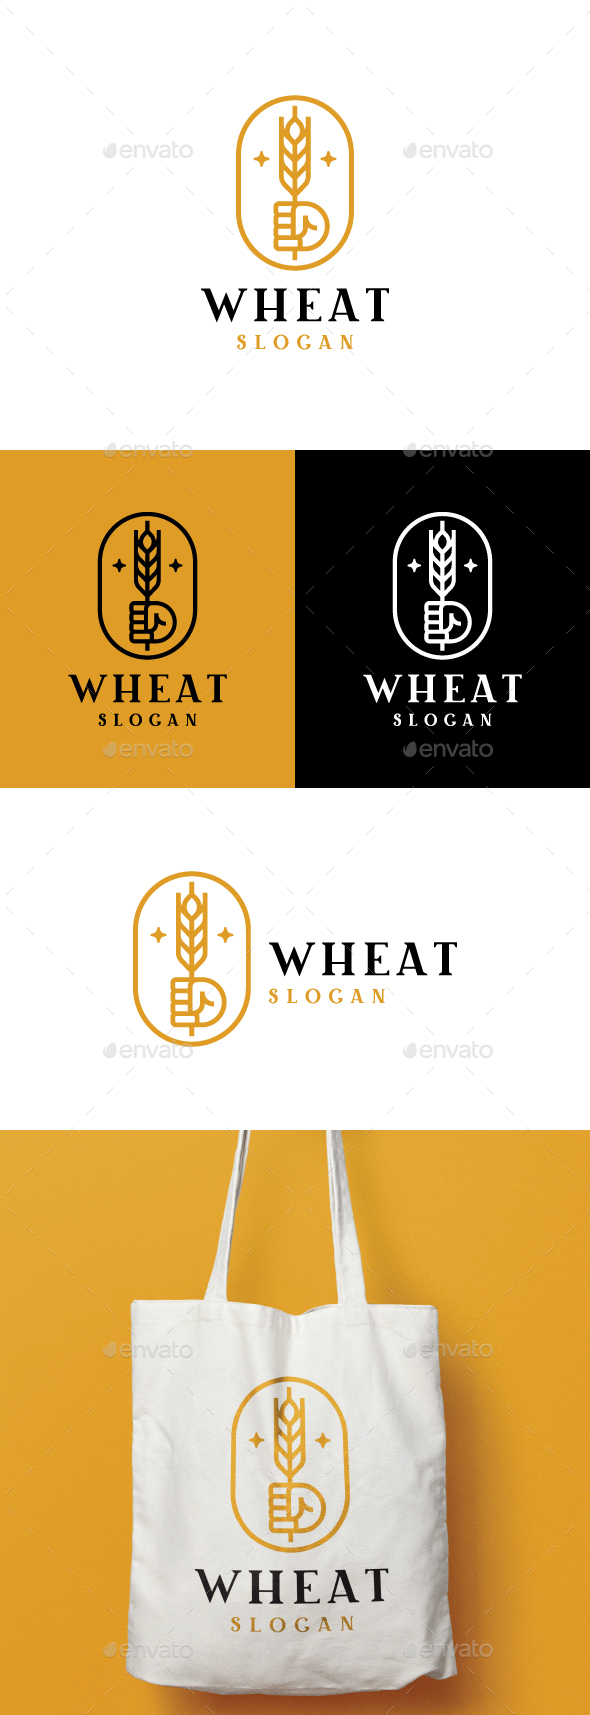 [DOWNLOAD]Wheat In Hand Logo